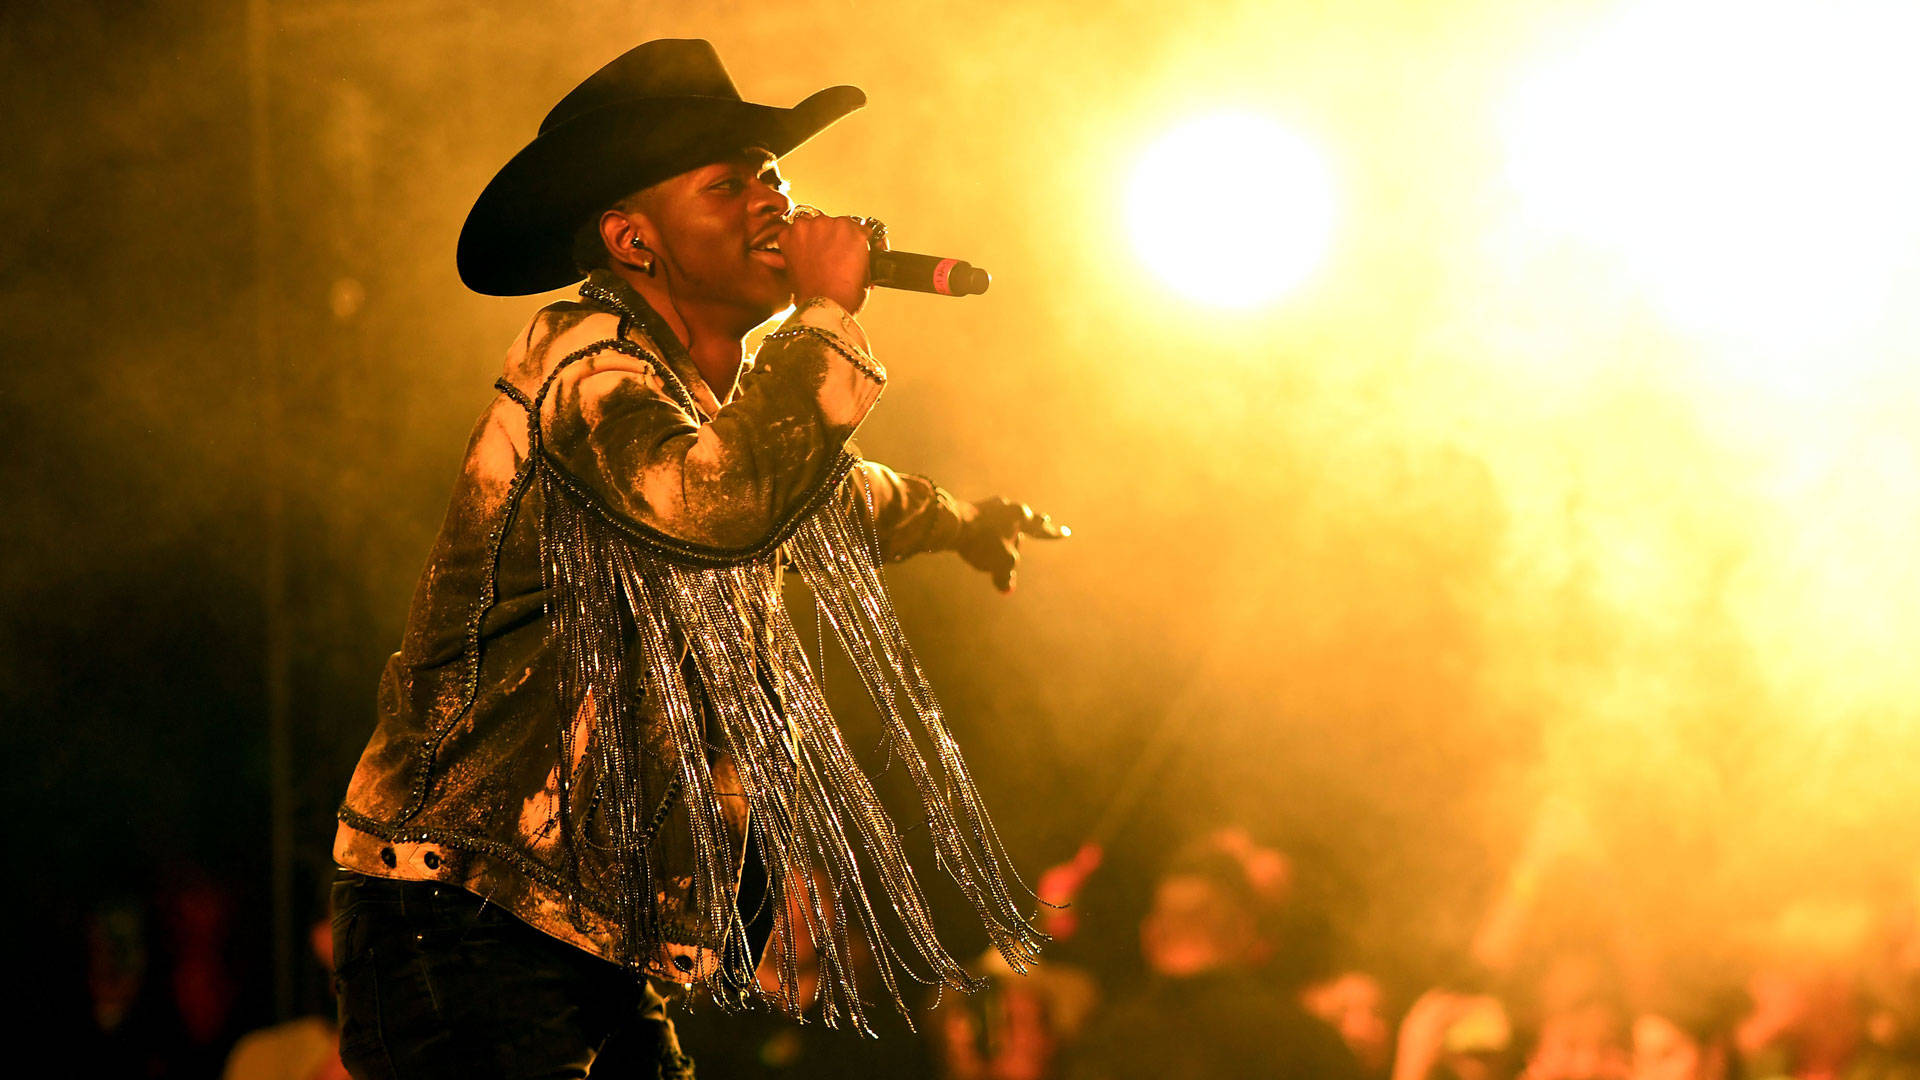 Lil Nas X has followed up his viral sensation "Old Town Road" with his latest song "Panini." Photo by Matt Winkelmeyer/Getty Images for Stagecoach